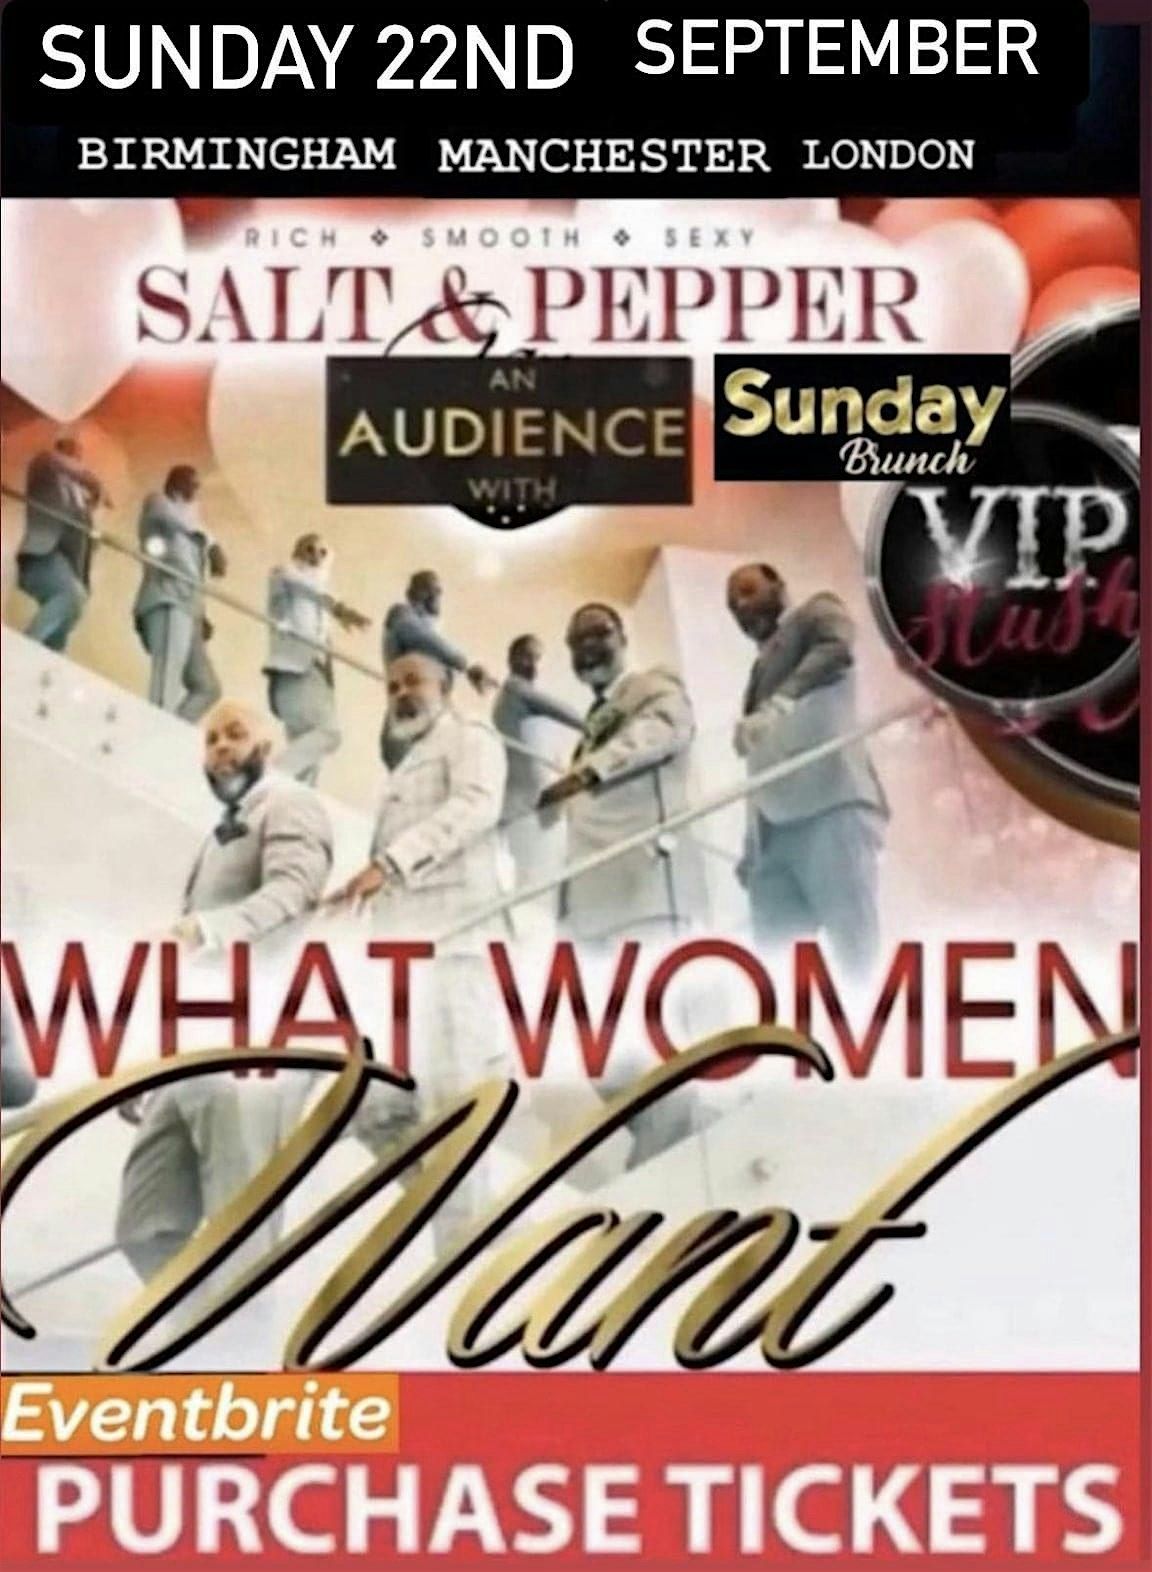 VIP STUSH SUNDAY BRUNCH PARTY MANCHESTER: An Audience with Salt & Pepper